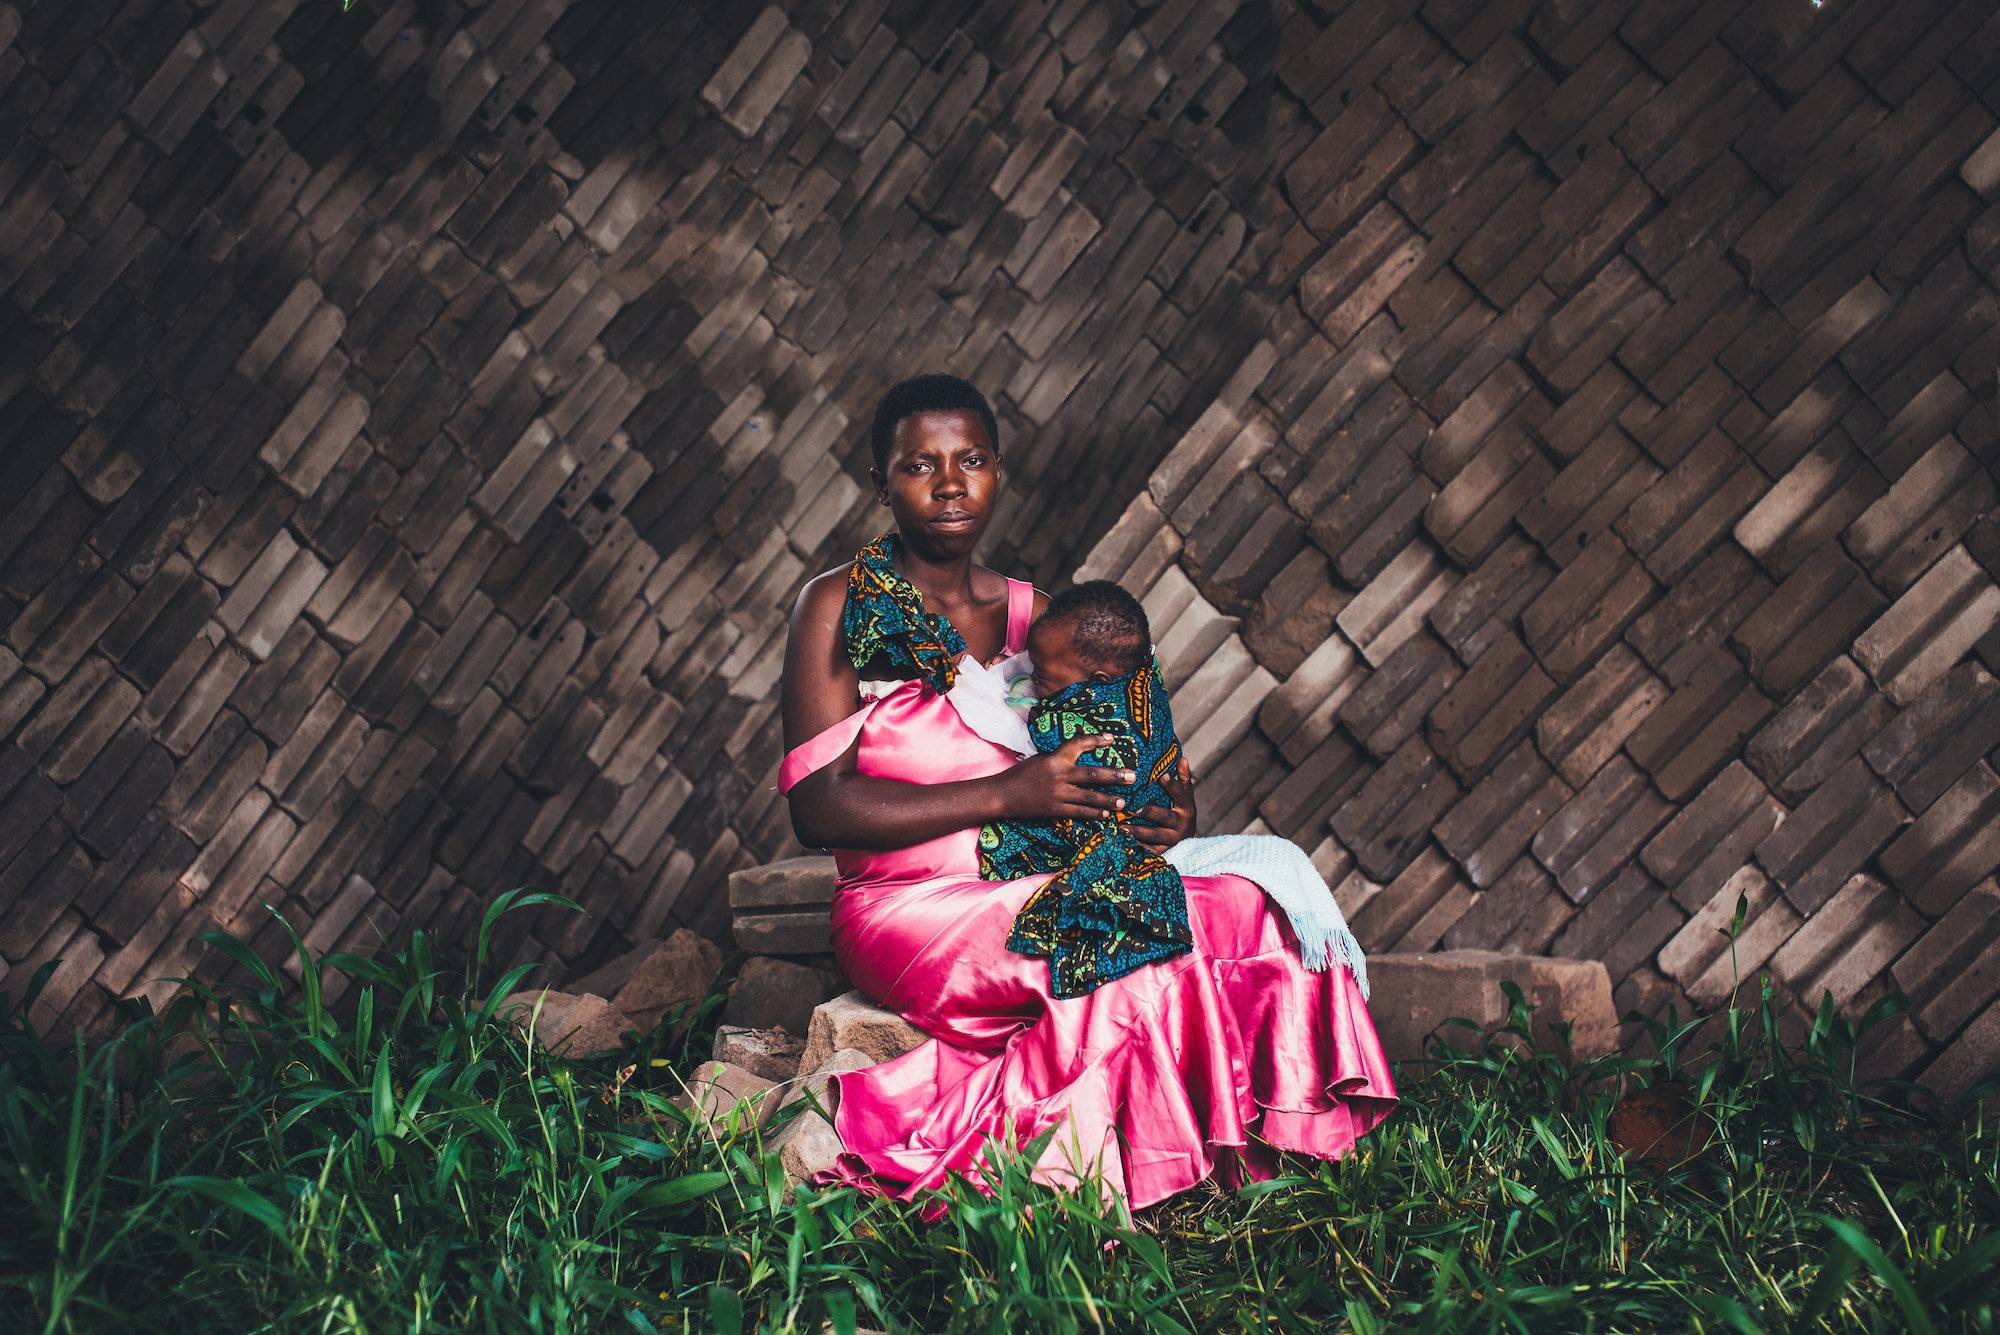 'I've Named Her Scholastica': Photos of Tanzania's Teen Mothers and Their Babies